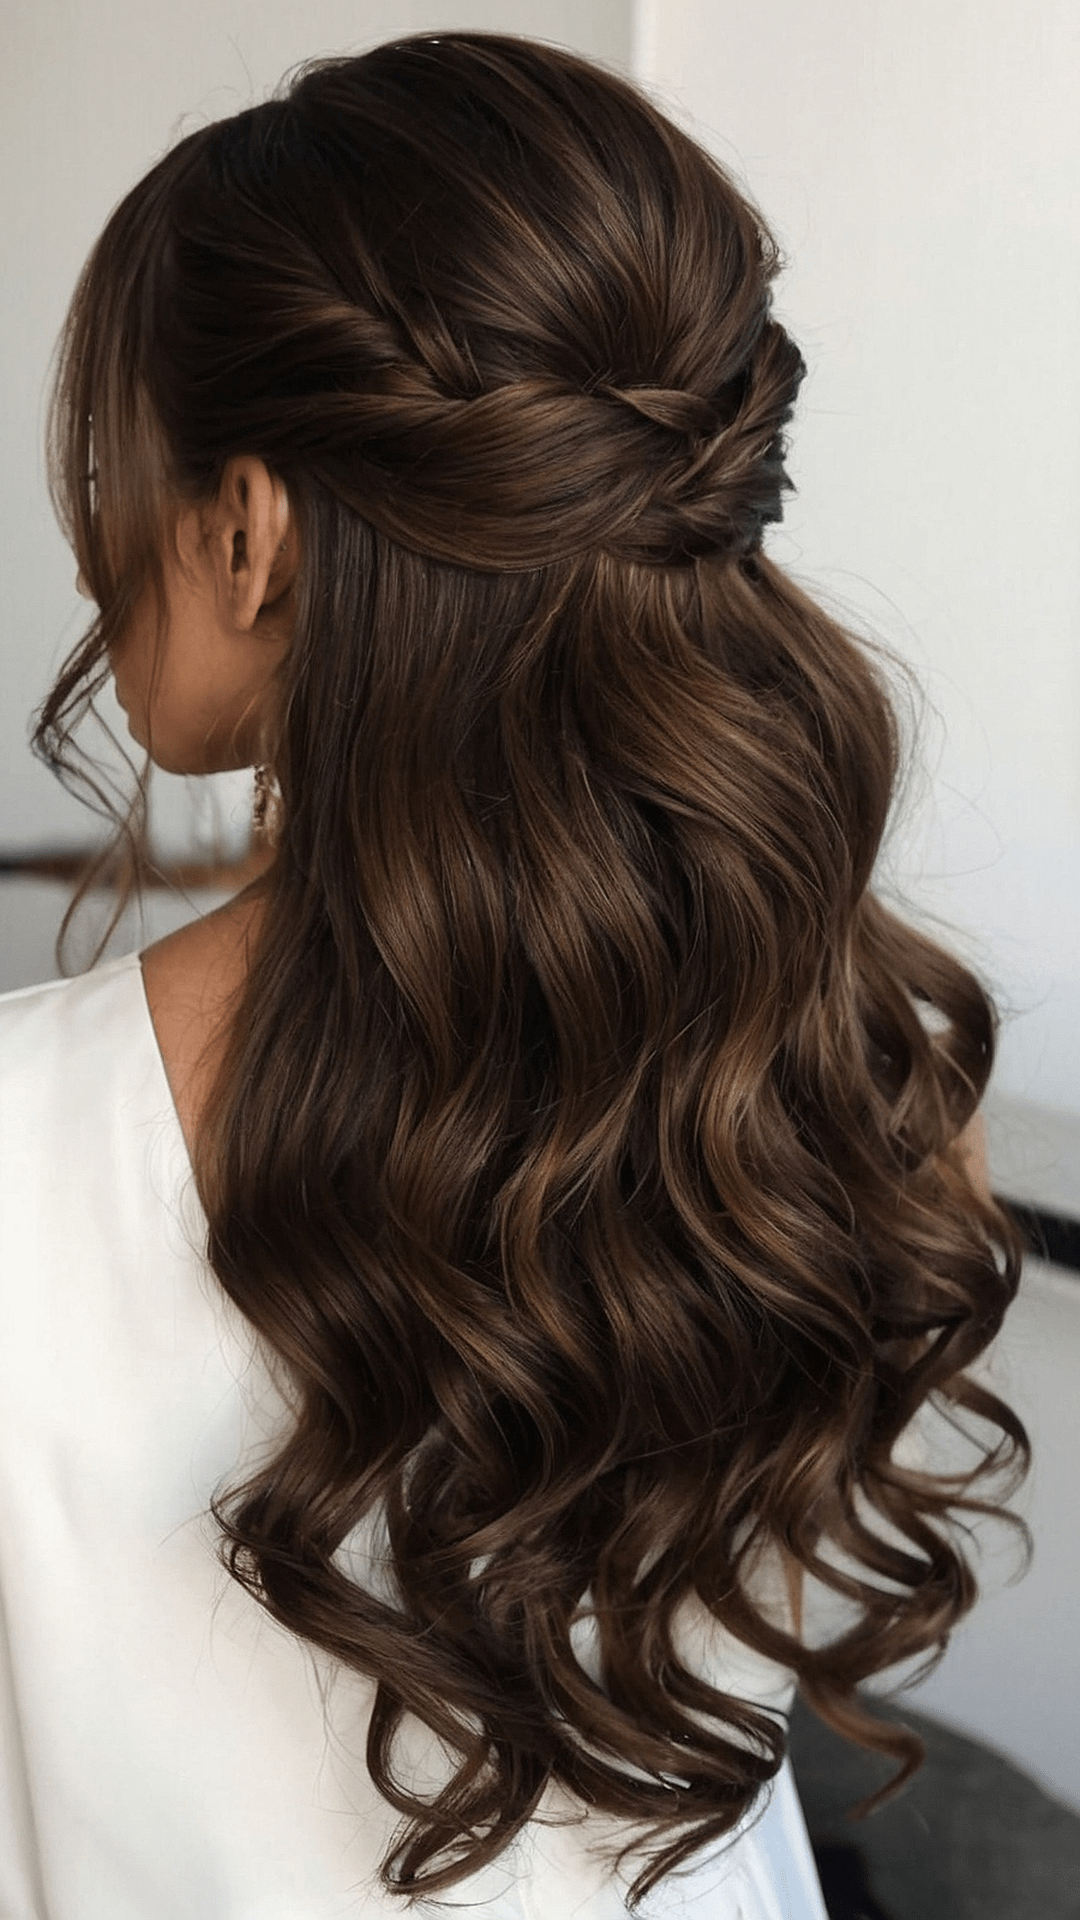 Cute Floral Bun Hairstyle for Prom